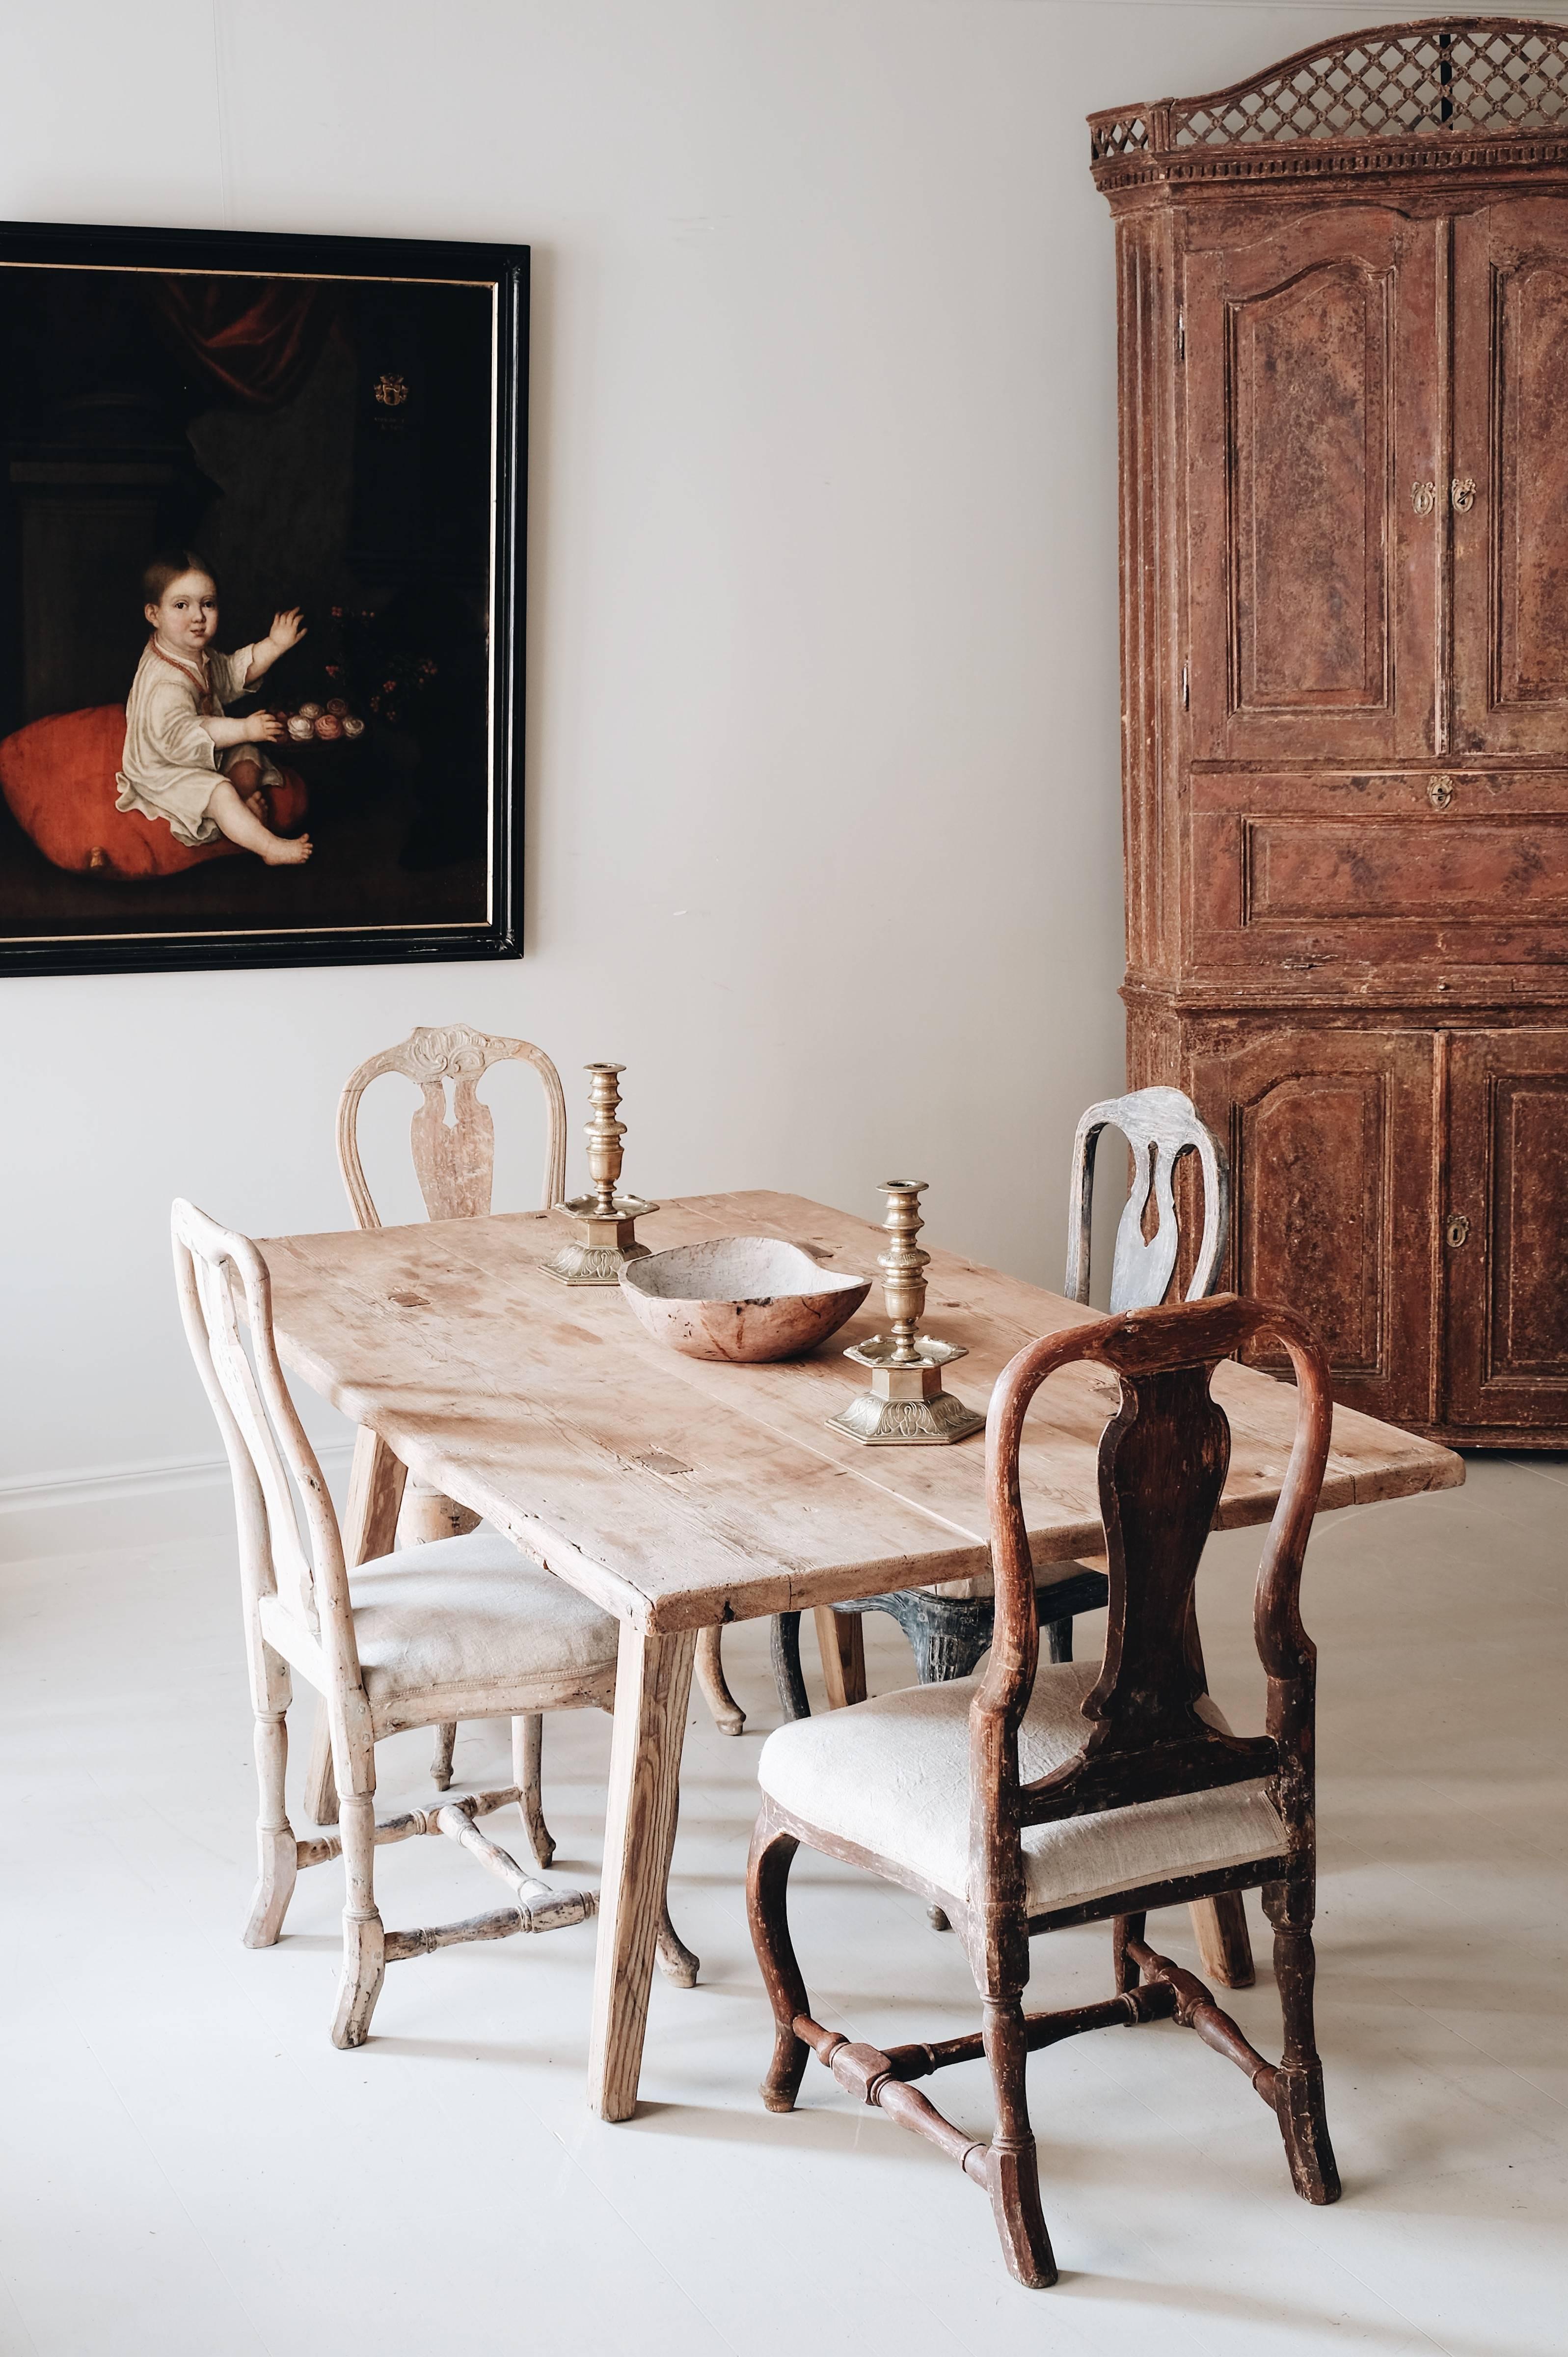 Rustic early 19th century Folk Art table that has aged very well, Sweden, circa 1800. 

These table's where made from early 17th-late 19th century and was most likely used as a multi purpose piece. Eating, working and sitting. This particular